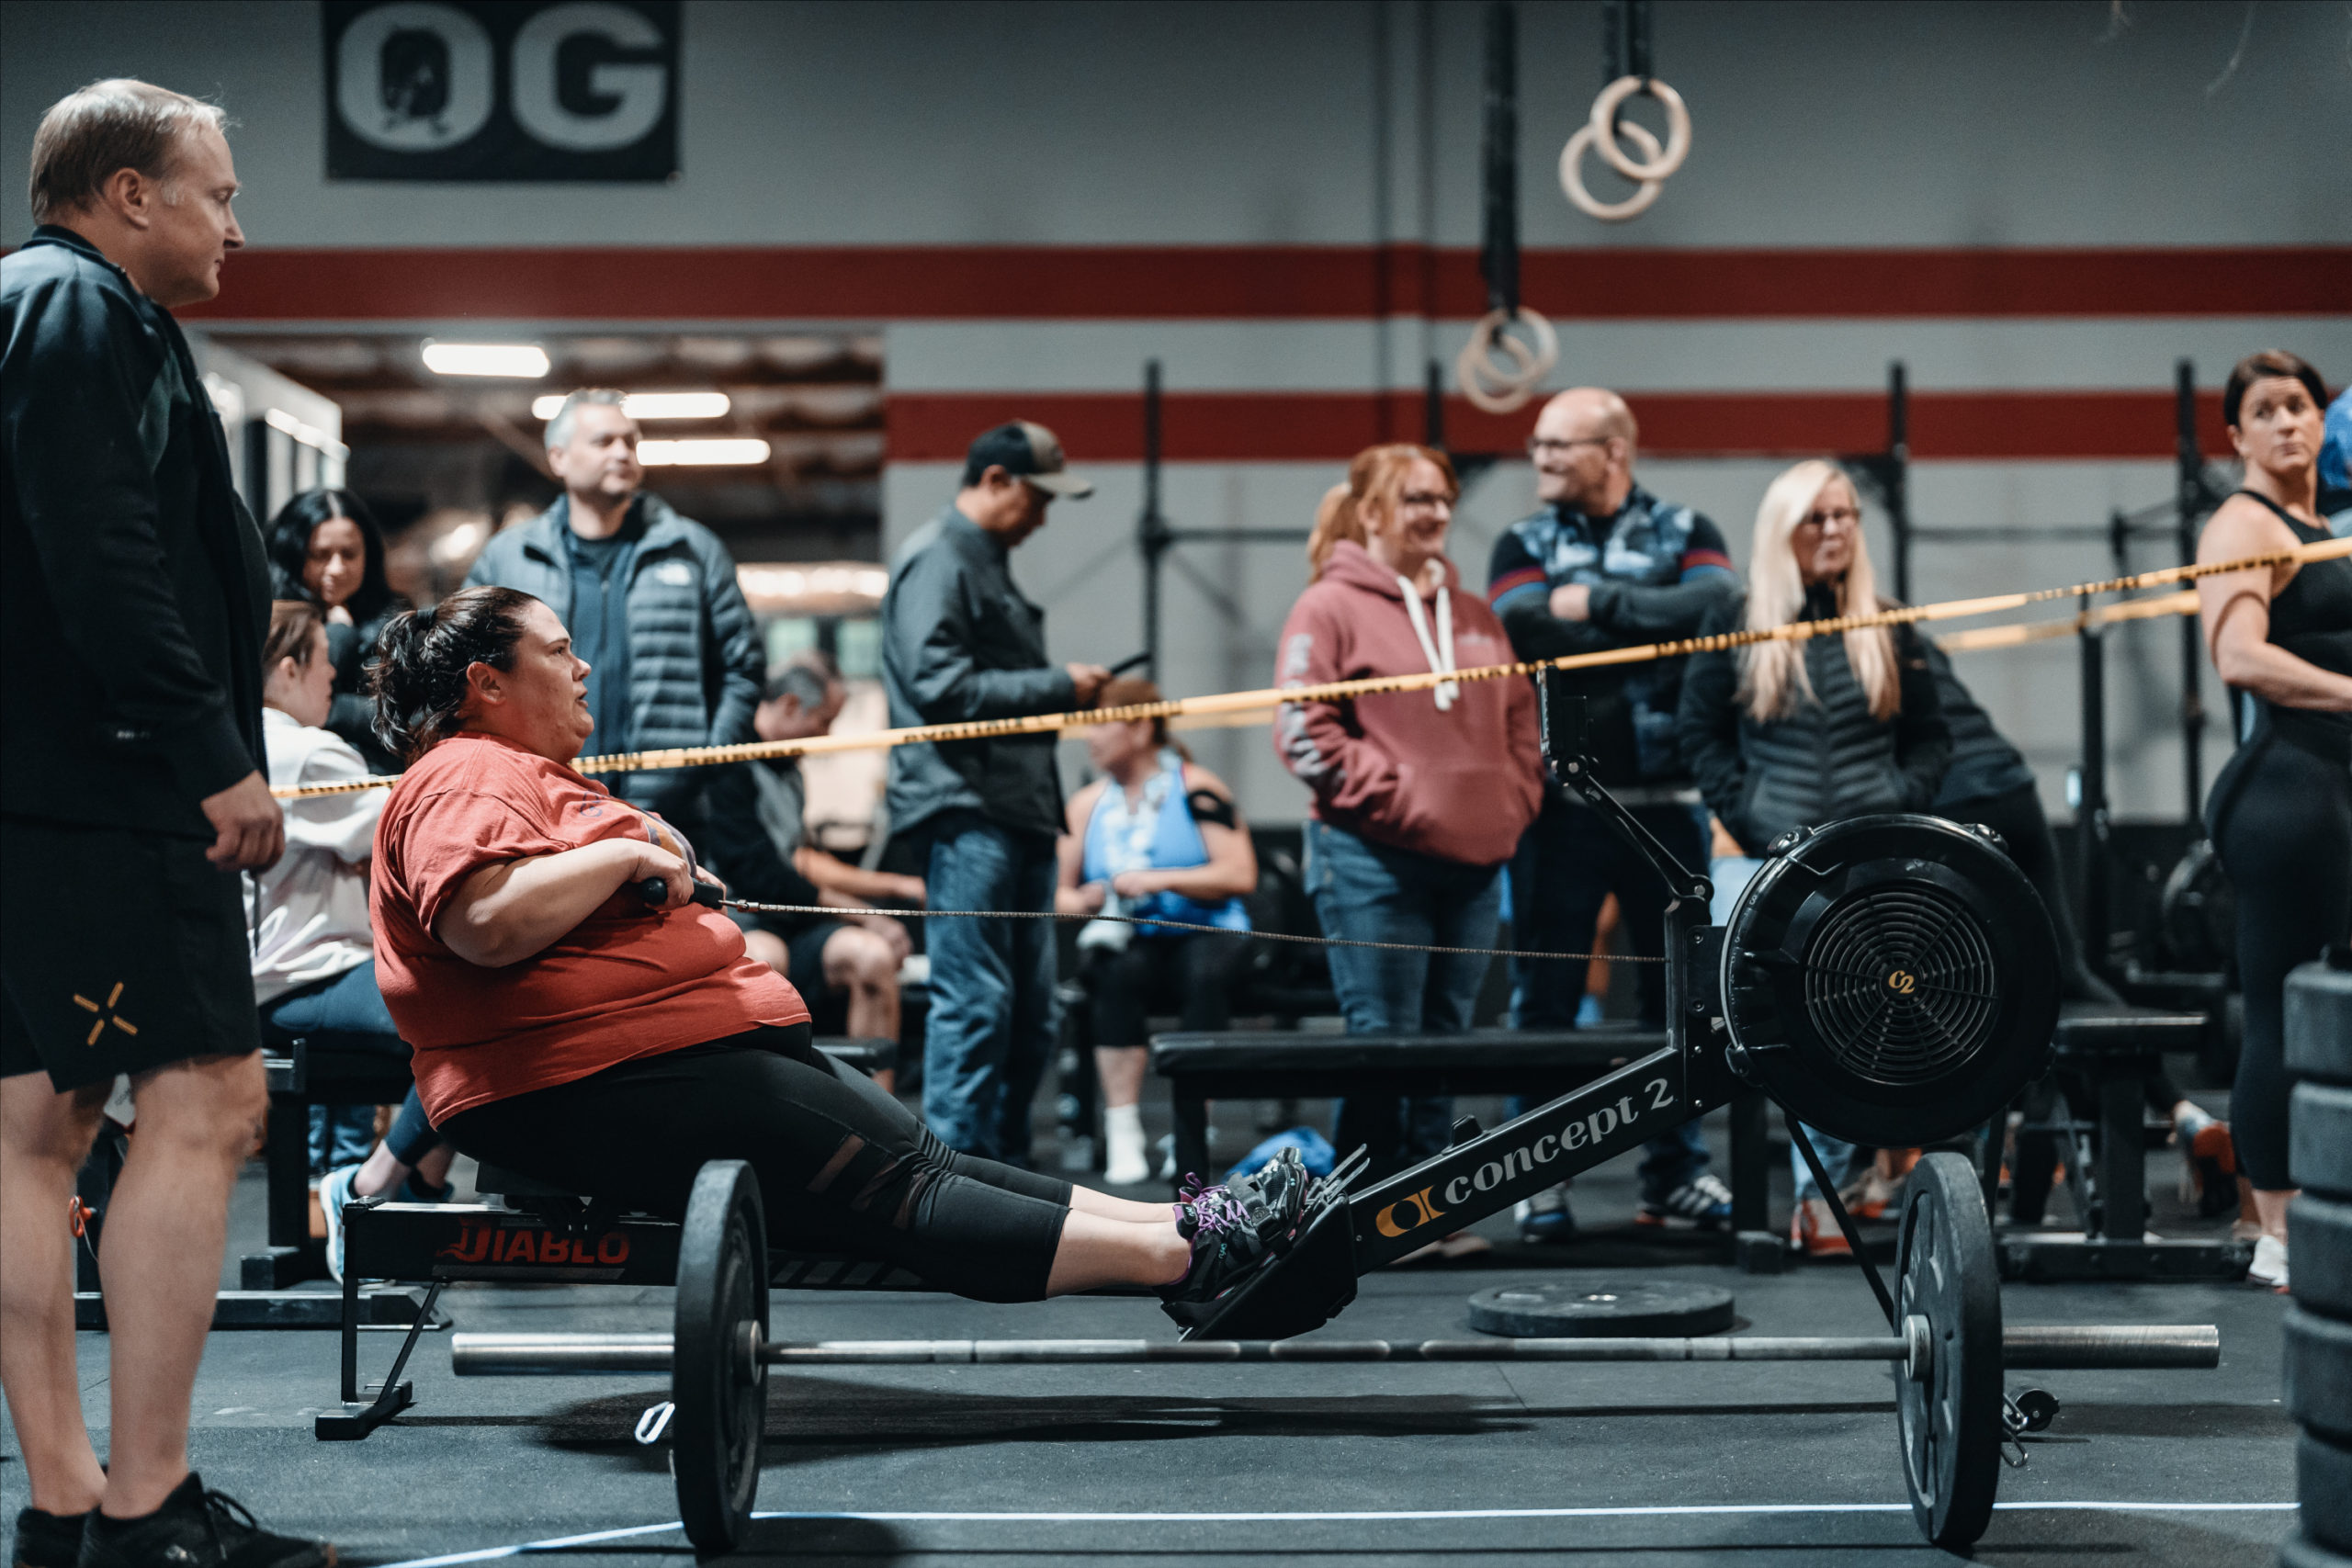 A woman in a red shirt on a rower during Open Test 23.1